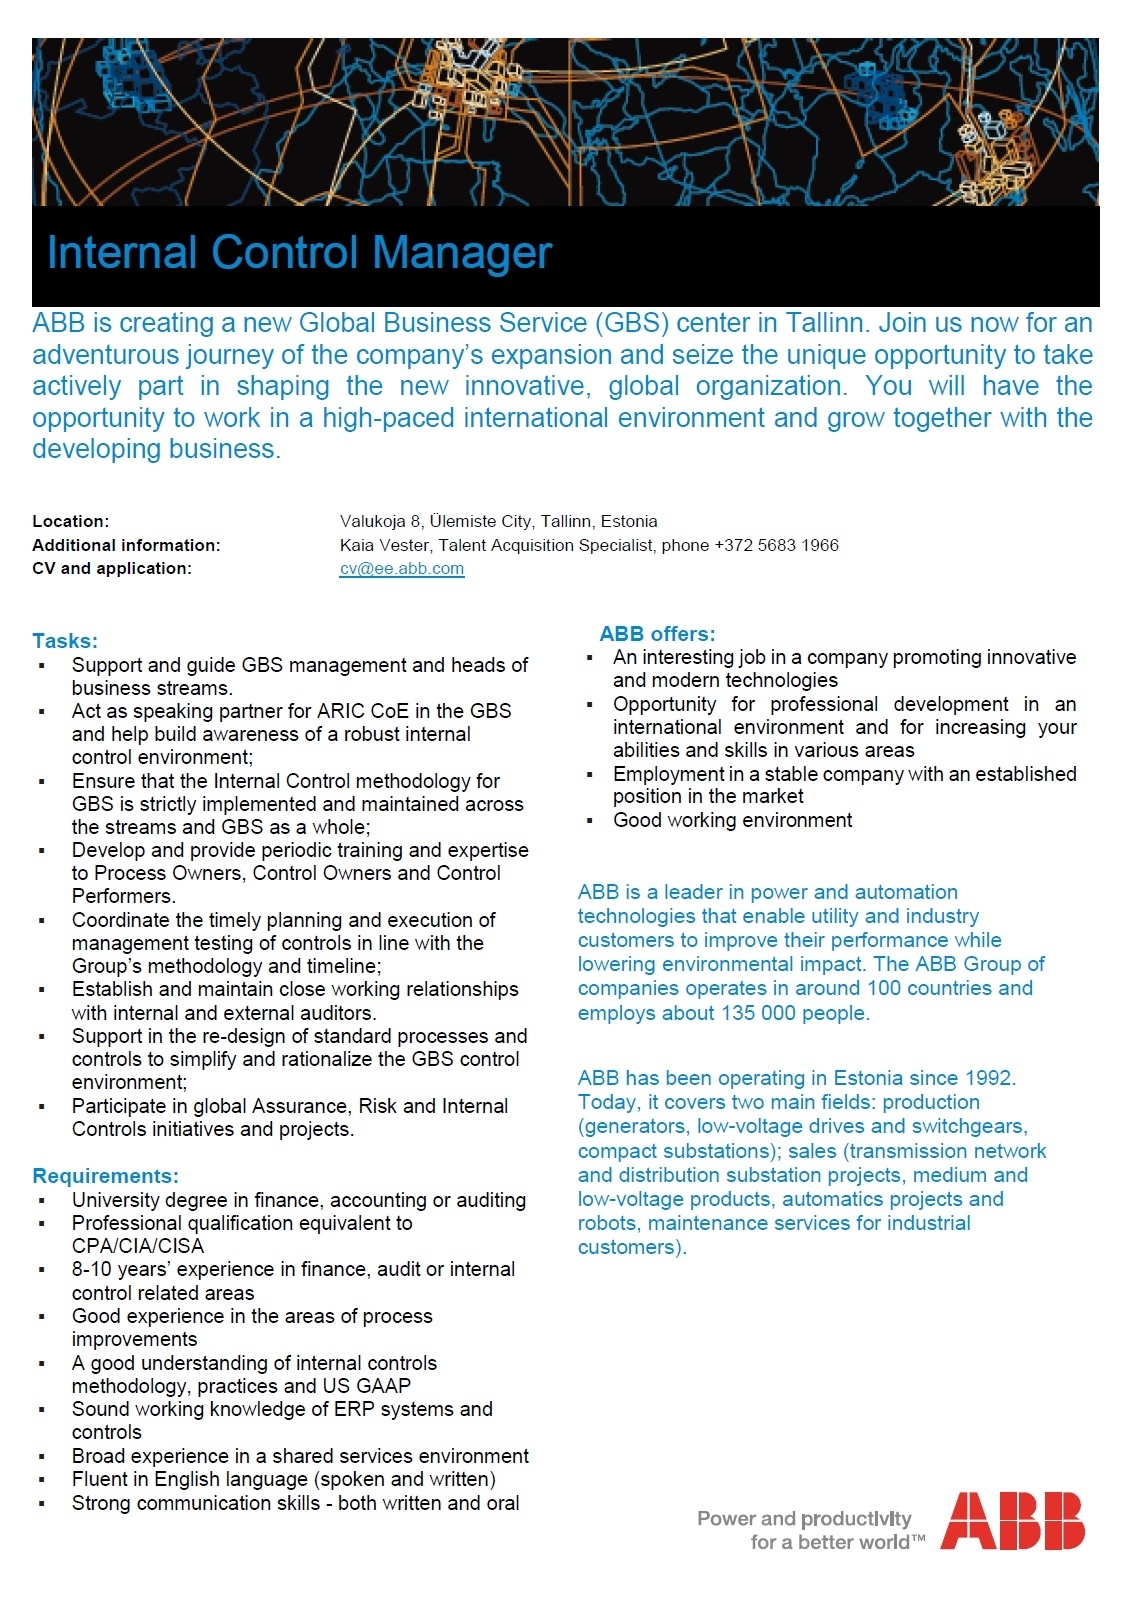 ABB AS Internal Control Manager